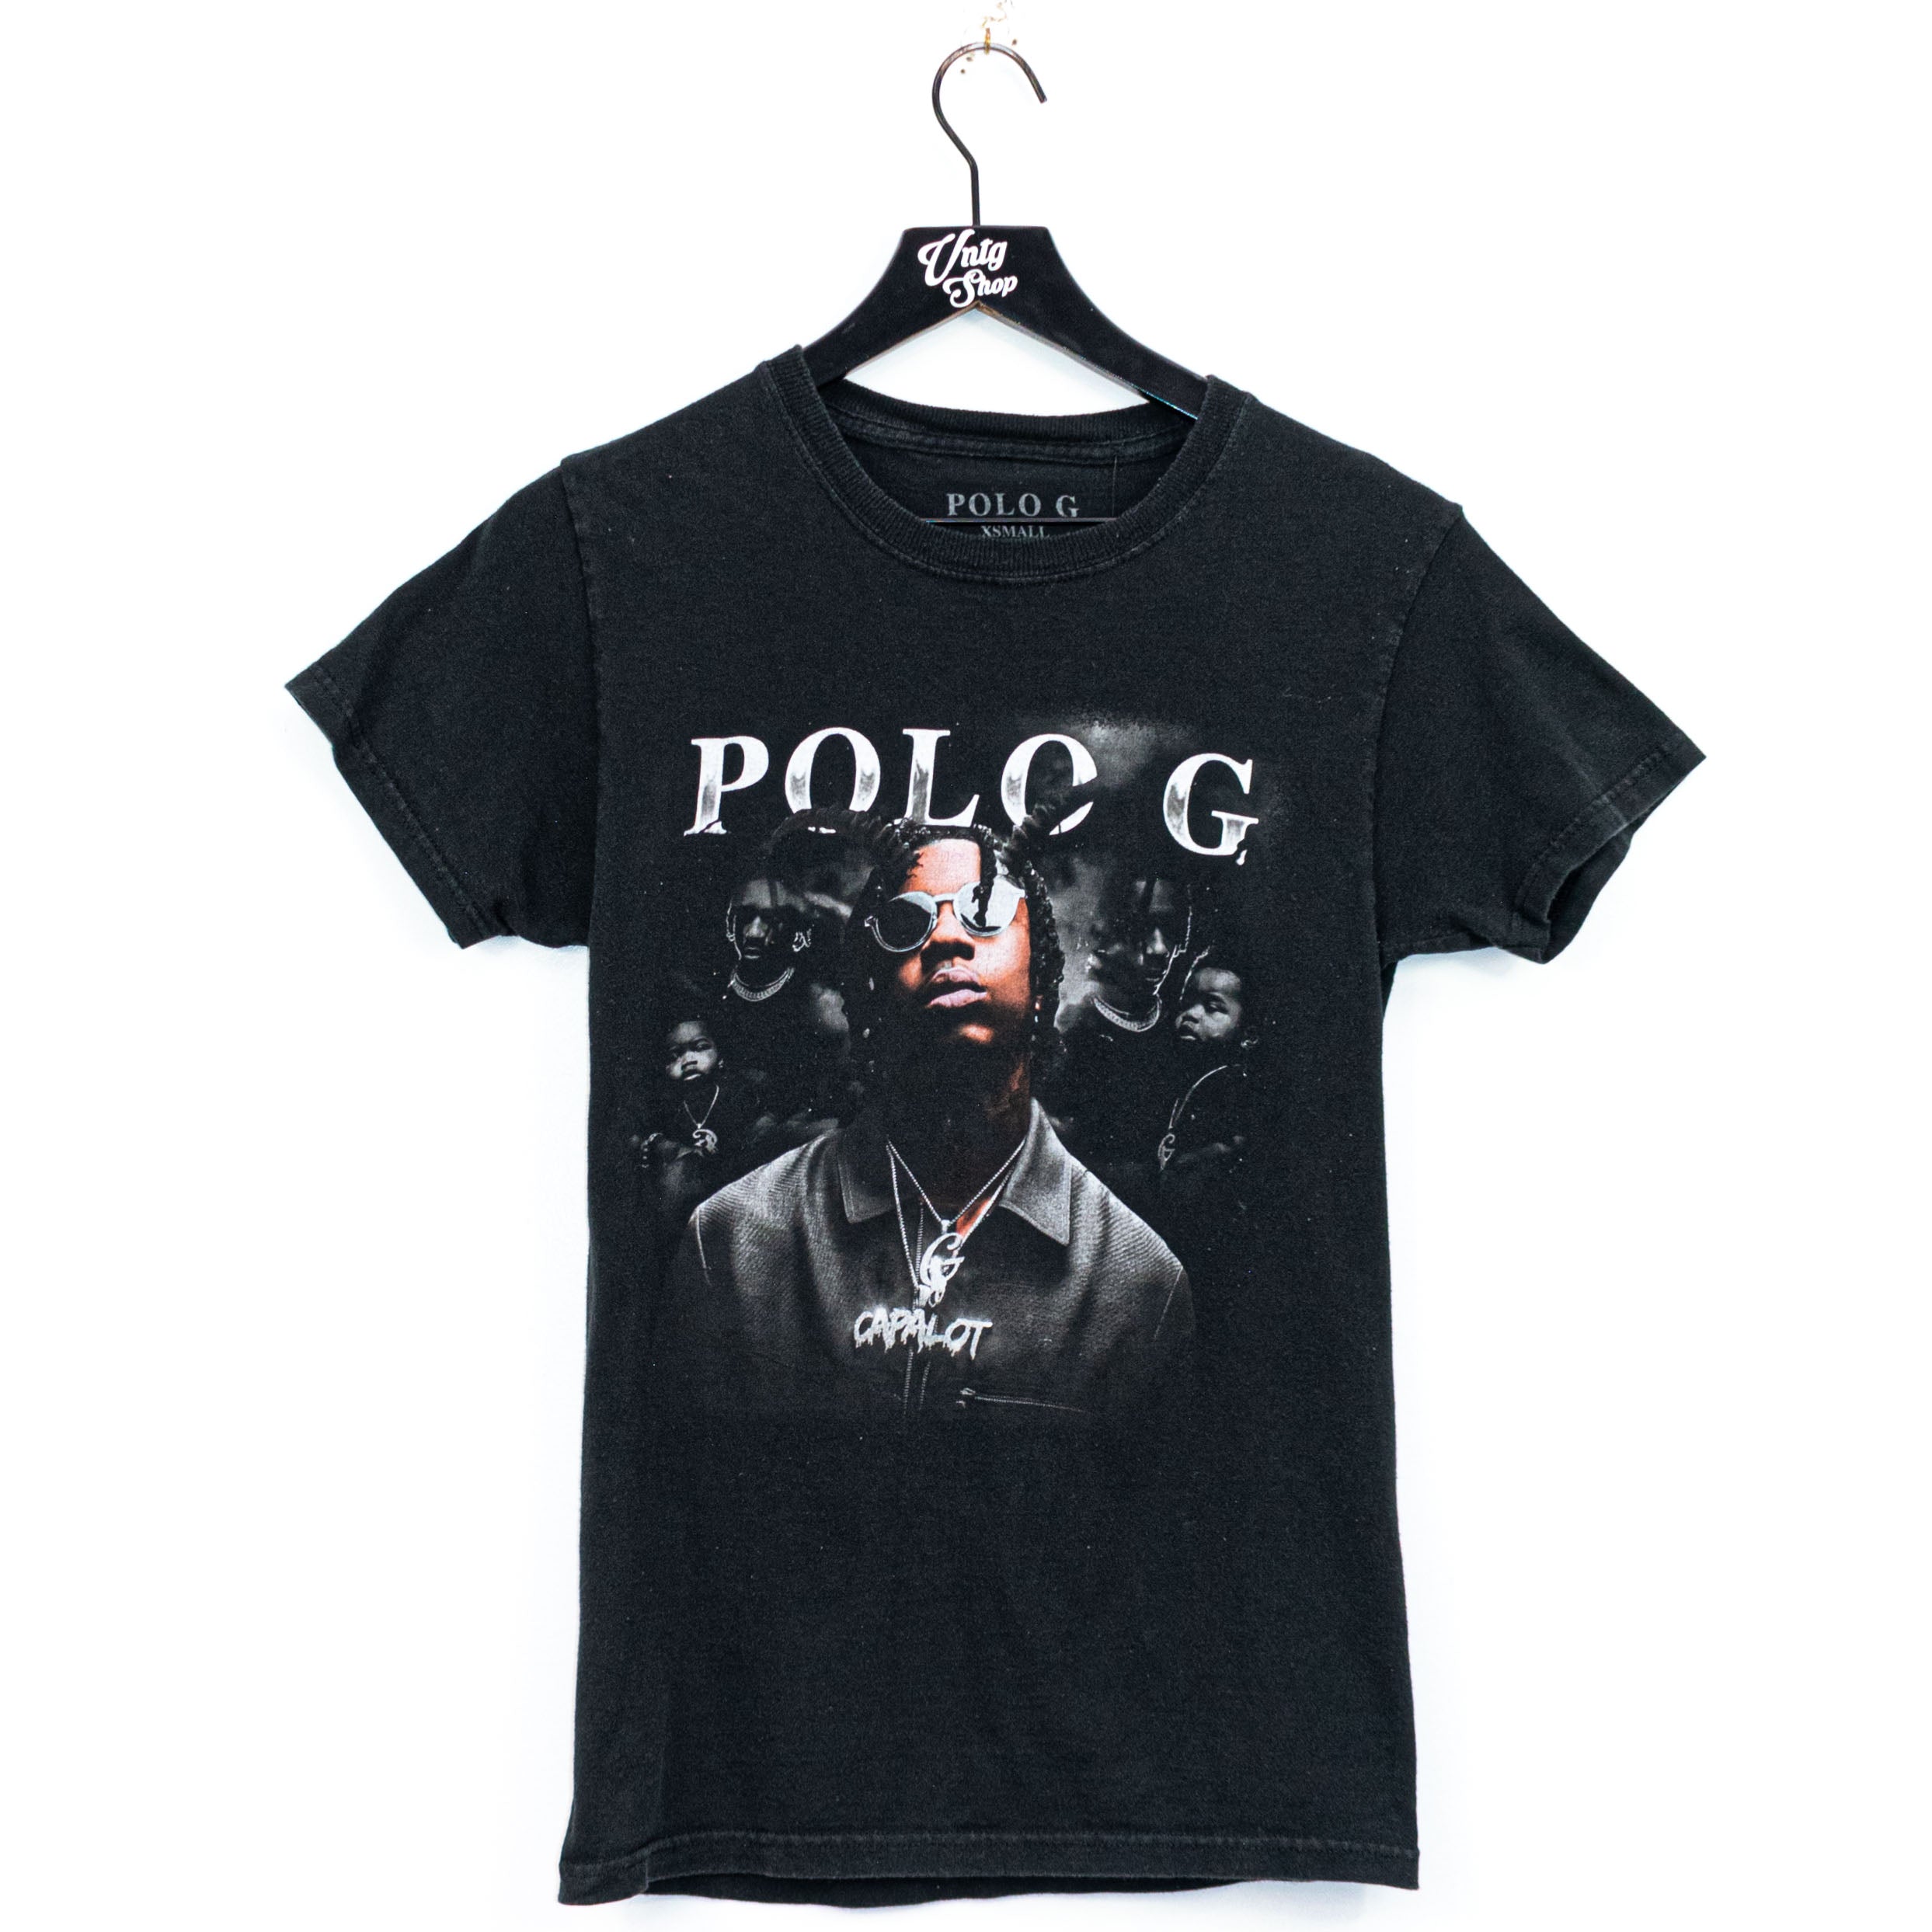 Polo G 'The Goat' Size S Pullover Hoodie Rapper Musician White Capalot